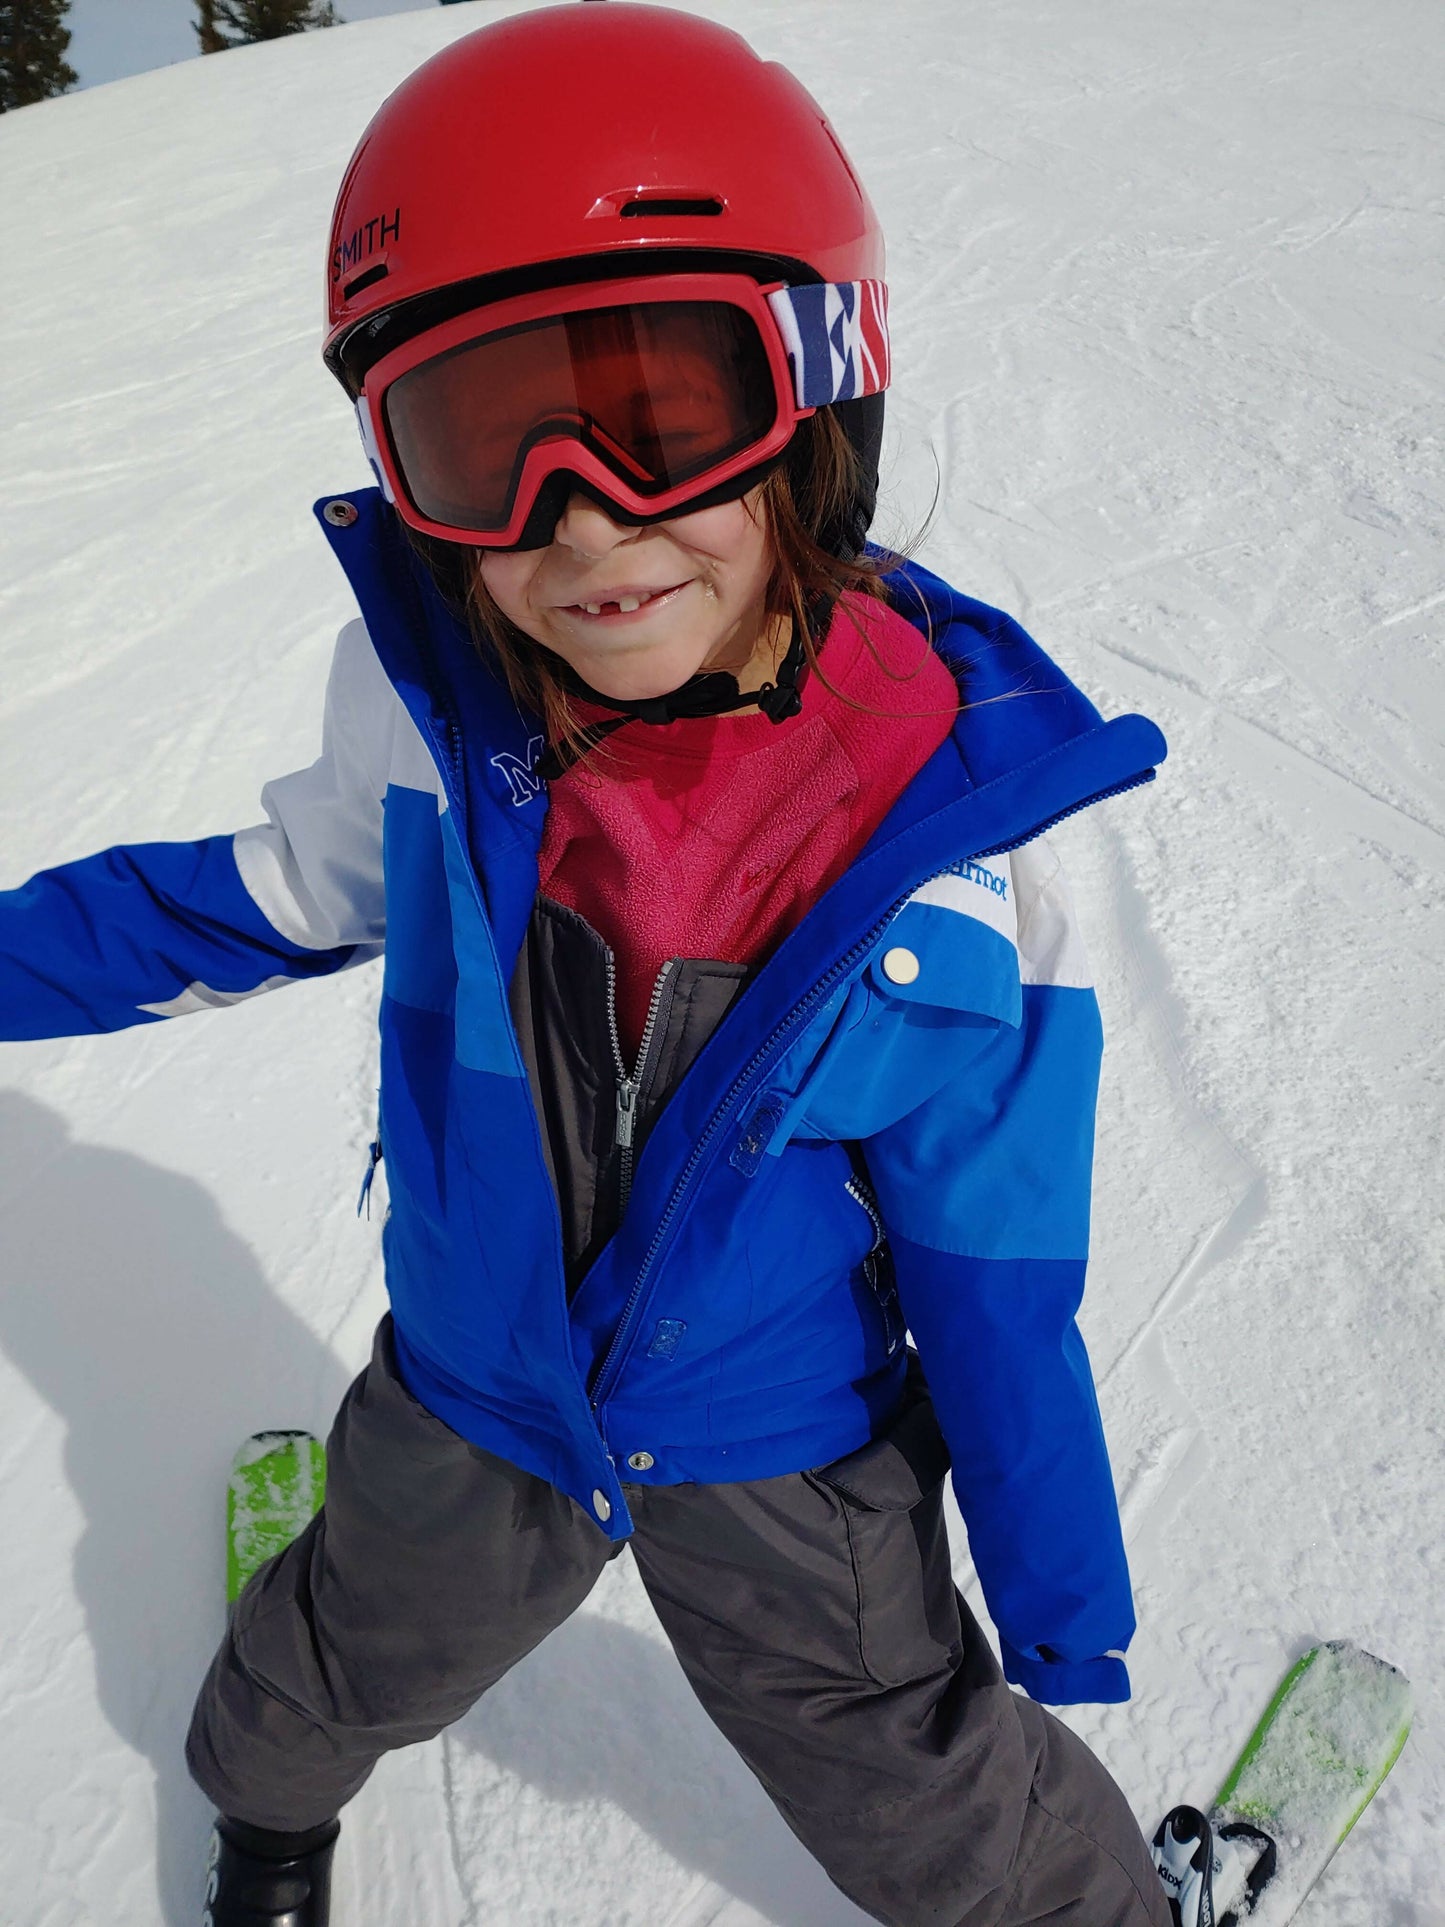 The Young Skier